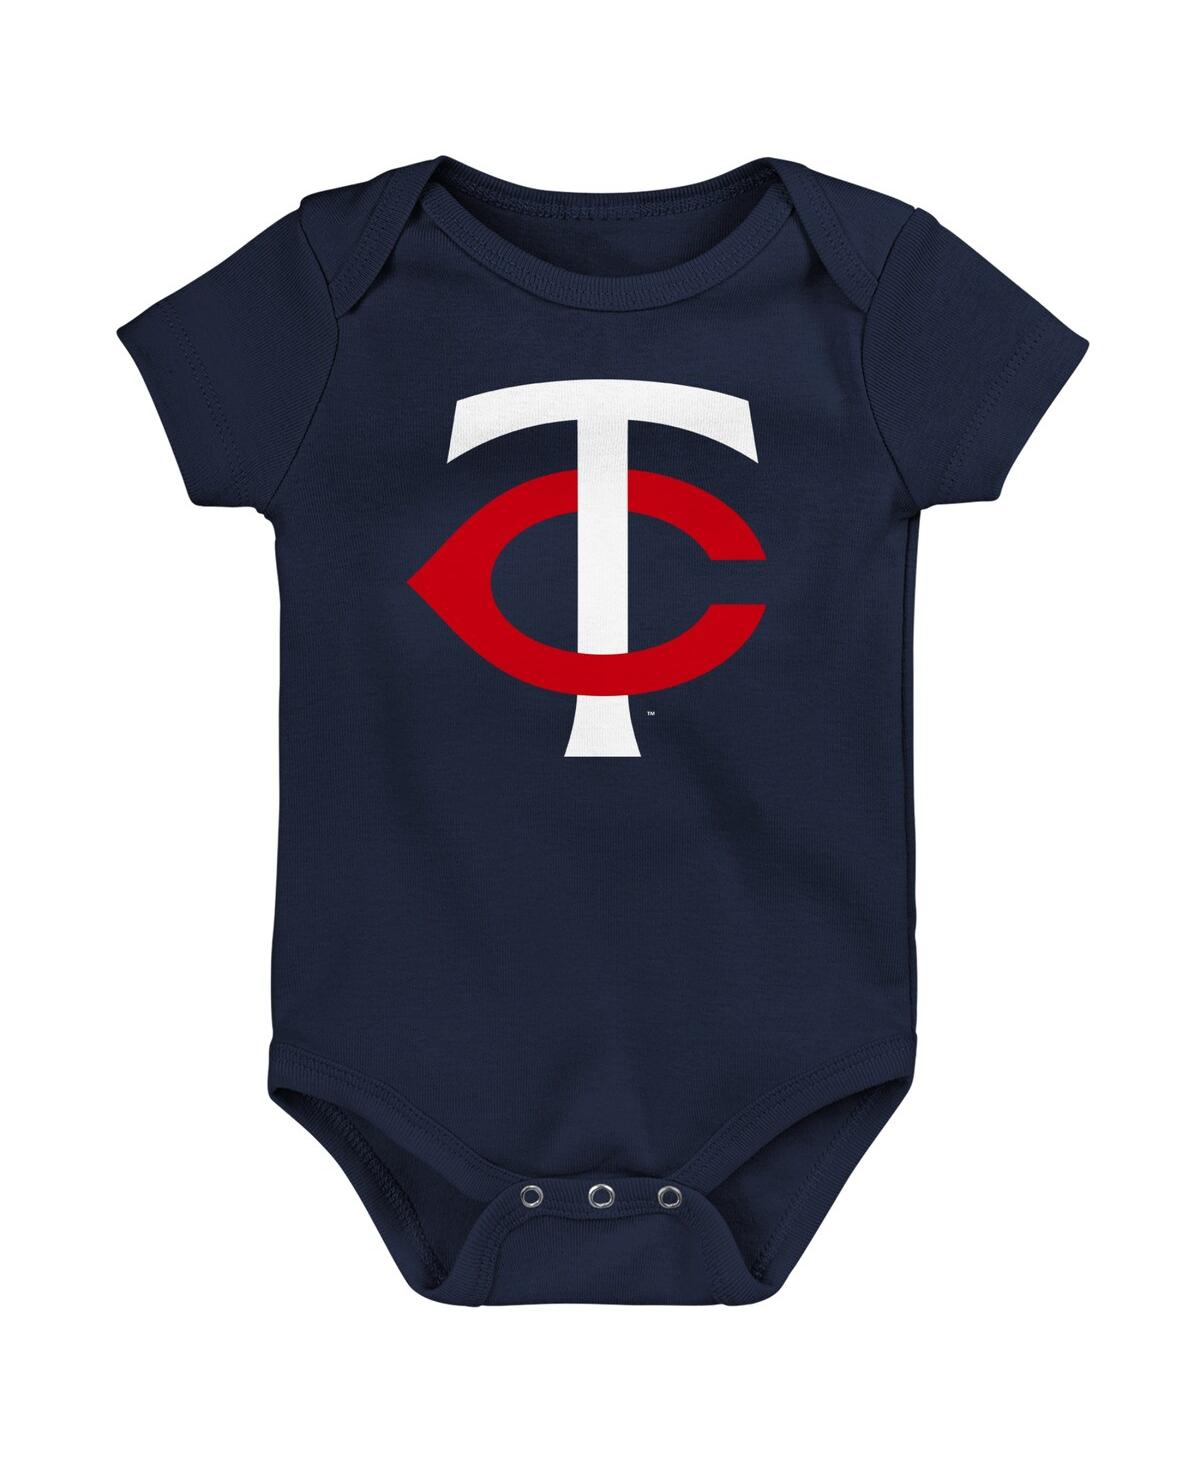 Outerstuff Babies' Newborn And Infant Boys And Girls Navy Minnesota Twins Primary Team Logo Bodysuit